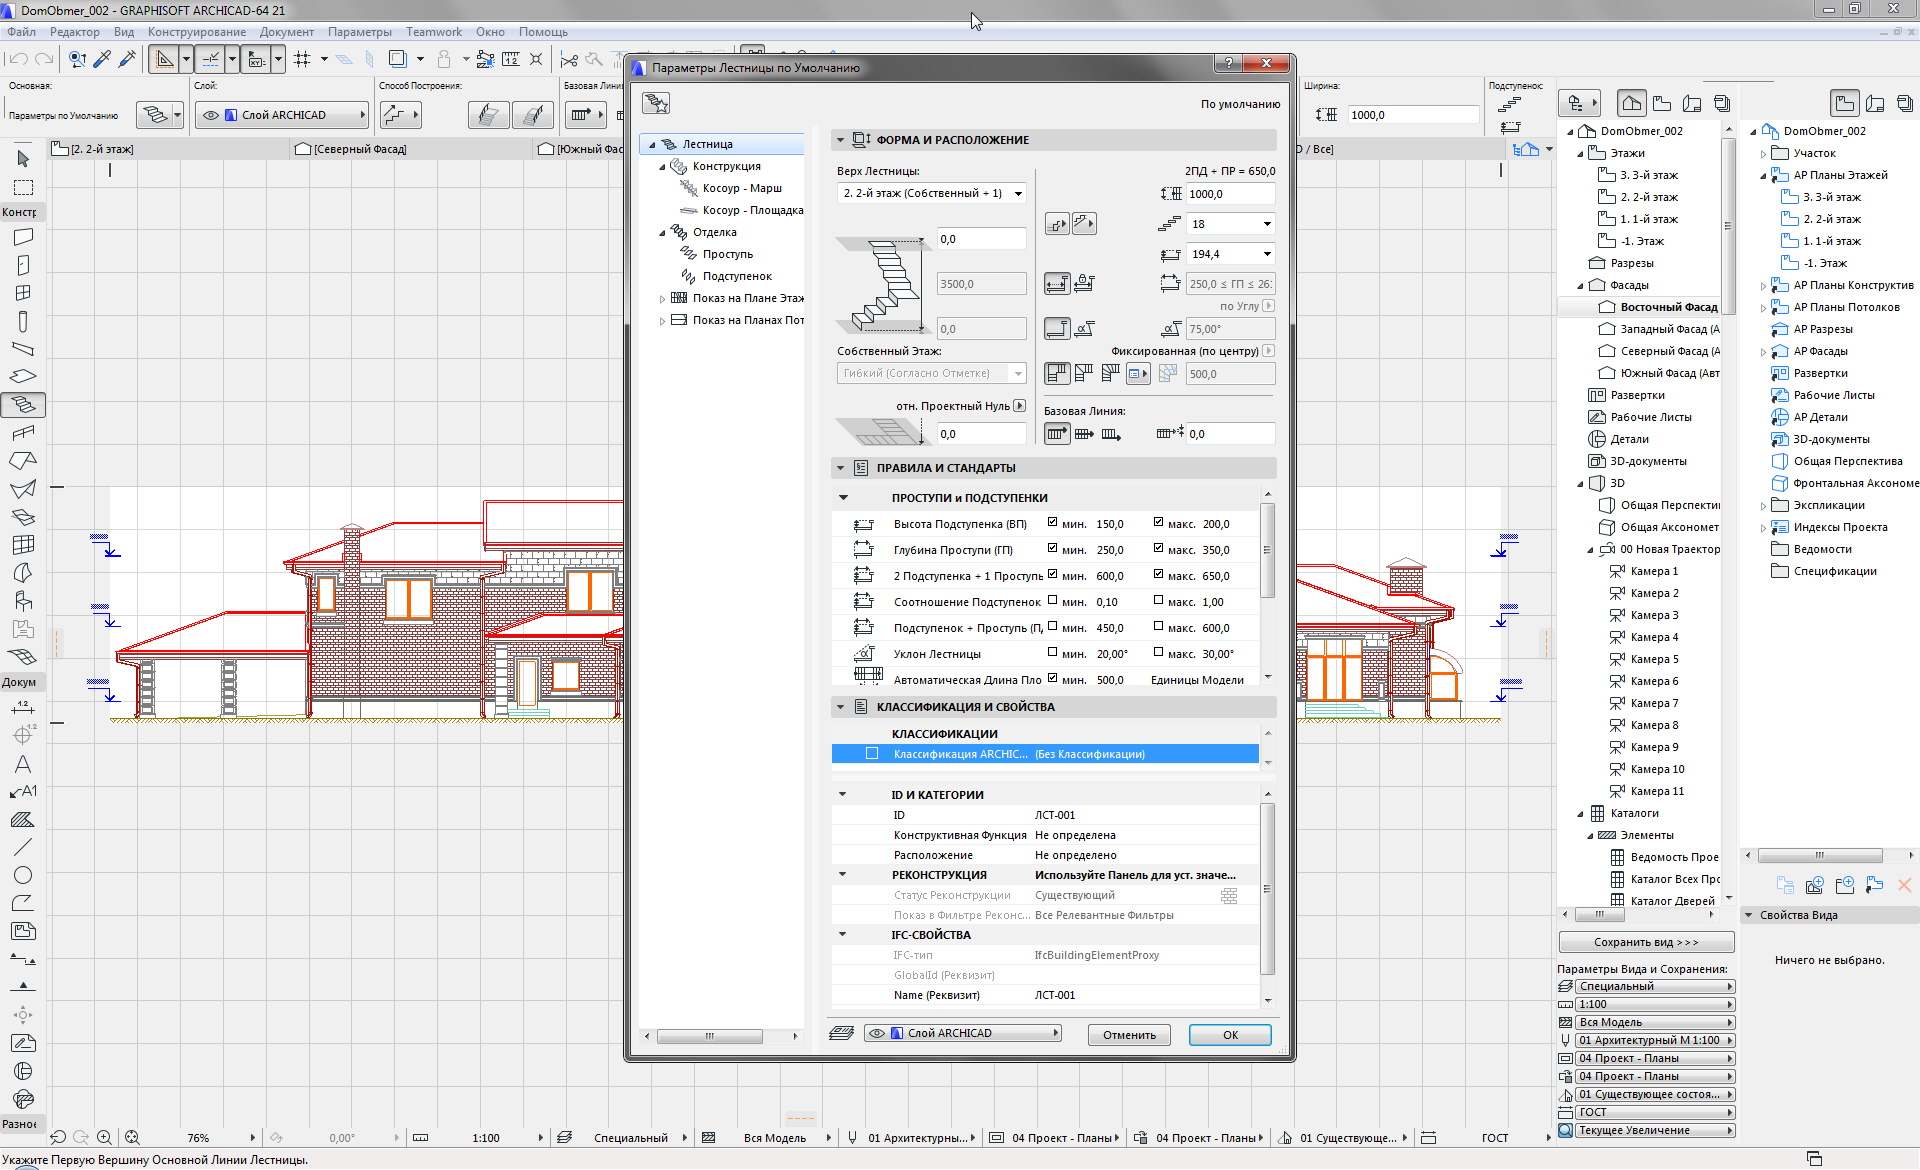 archicad student download